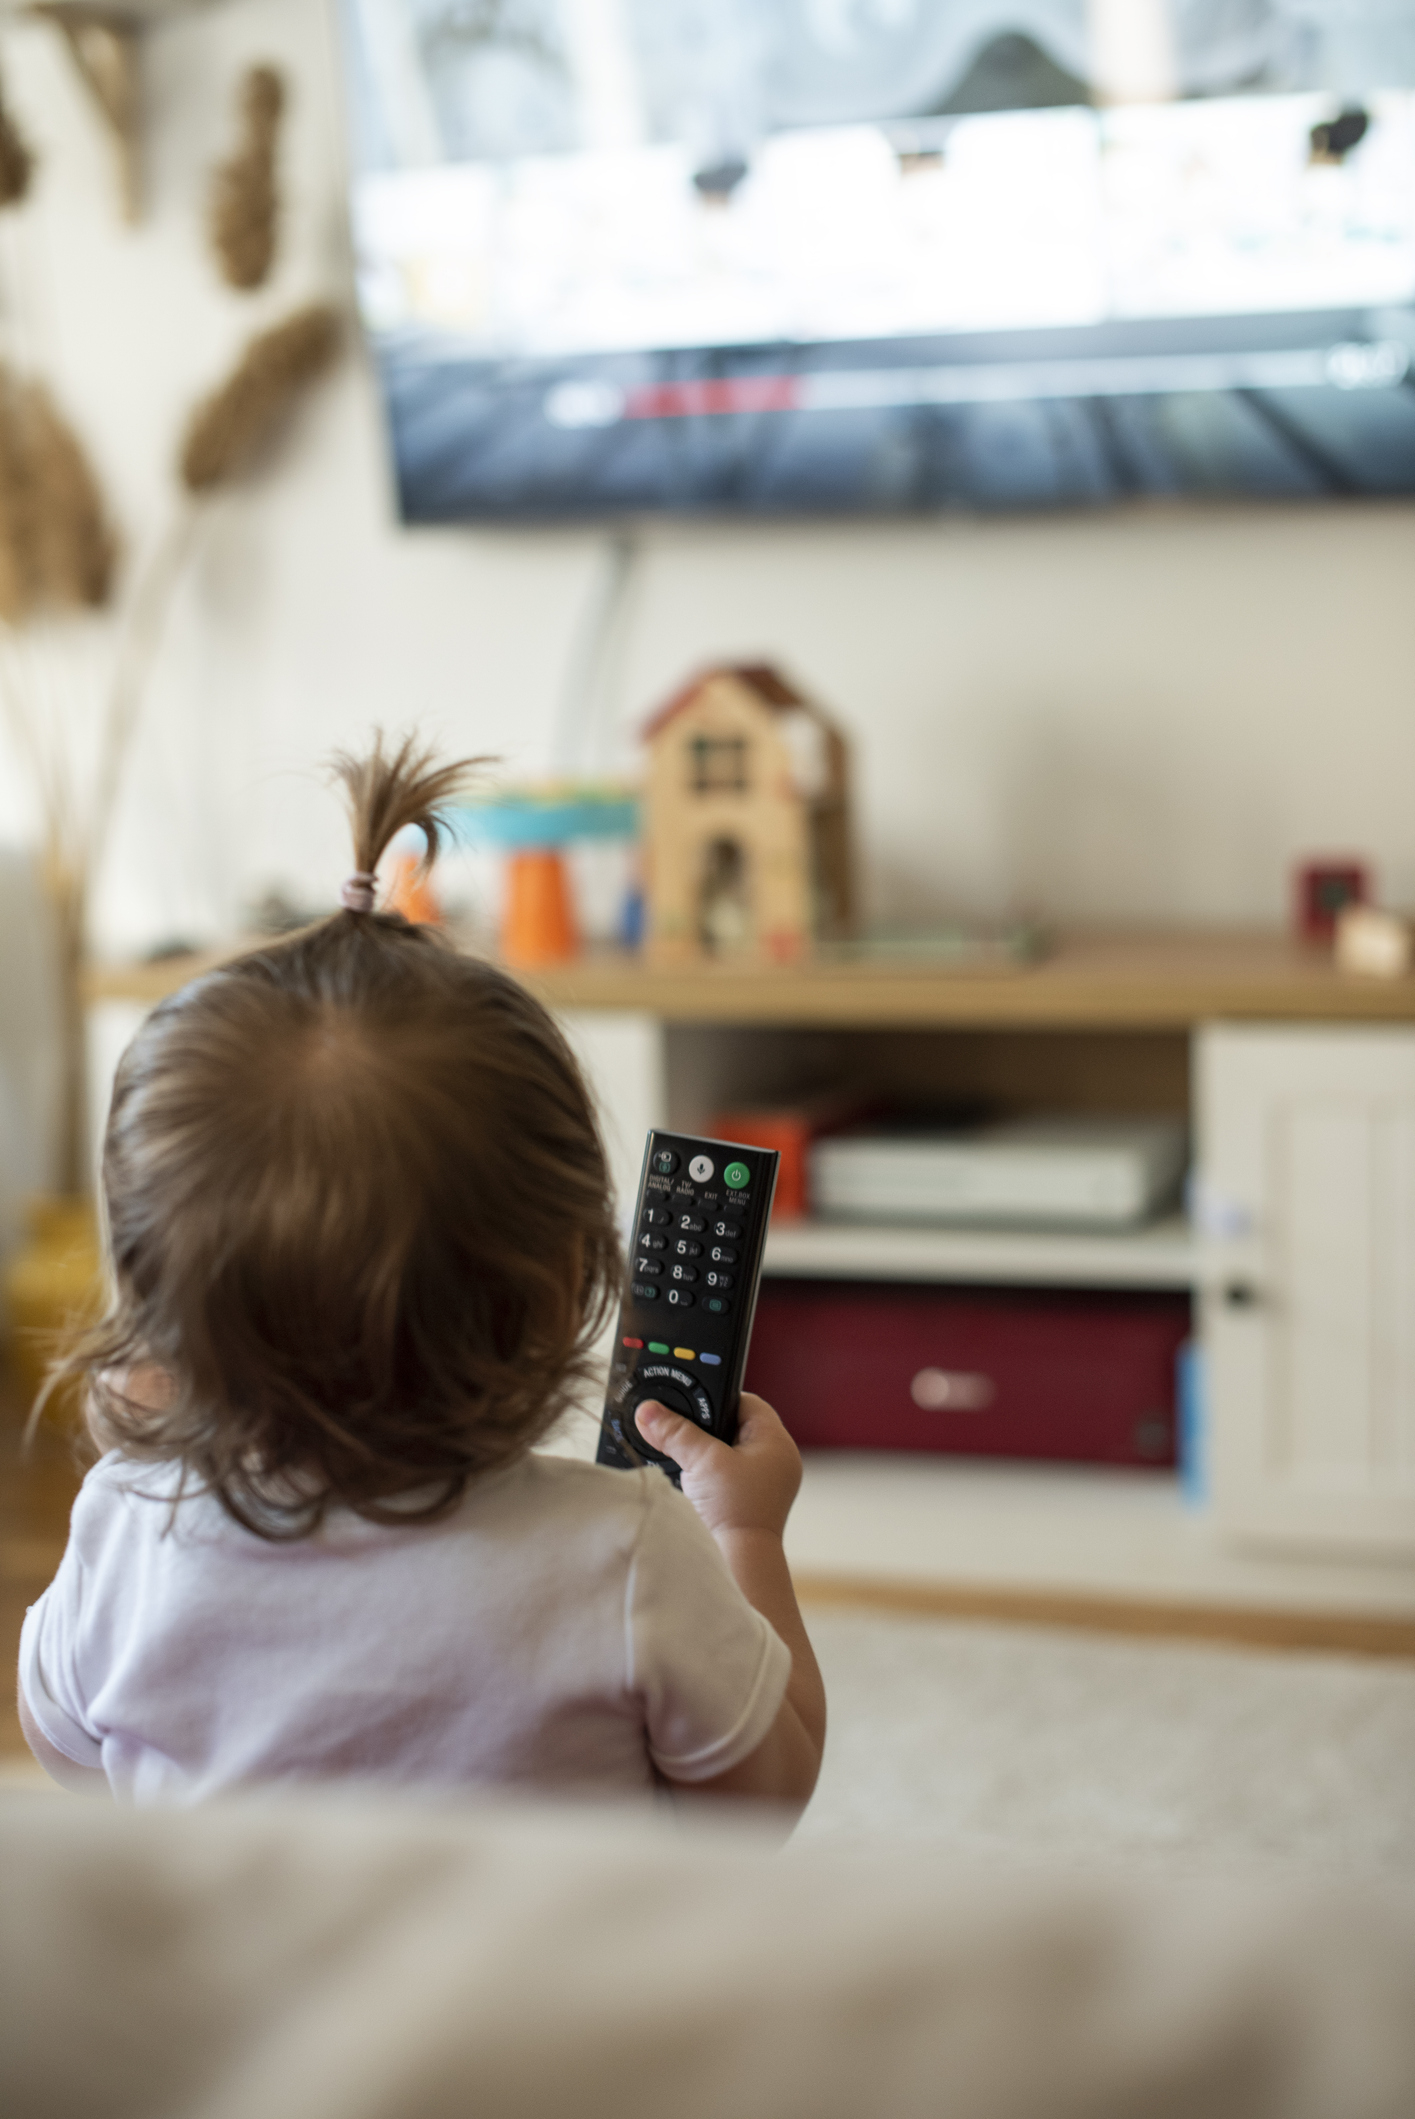 Toddler holding a remote control while facing a television screen